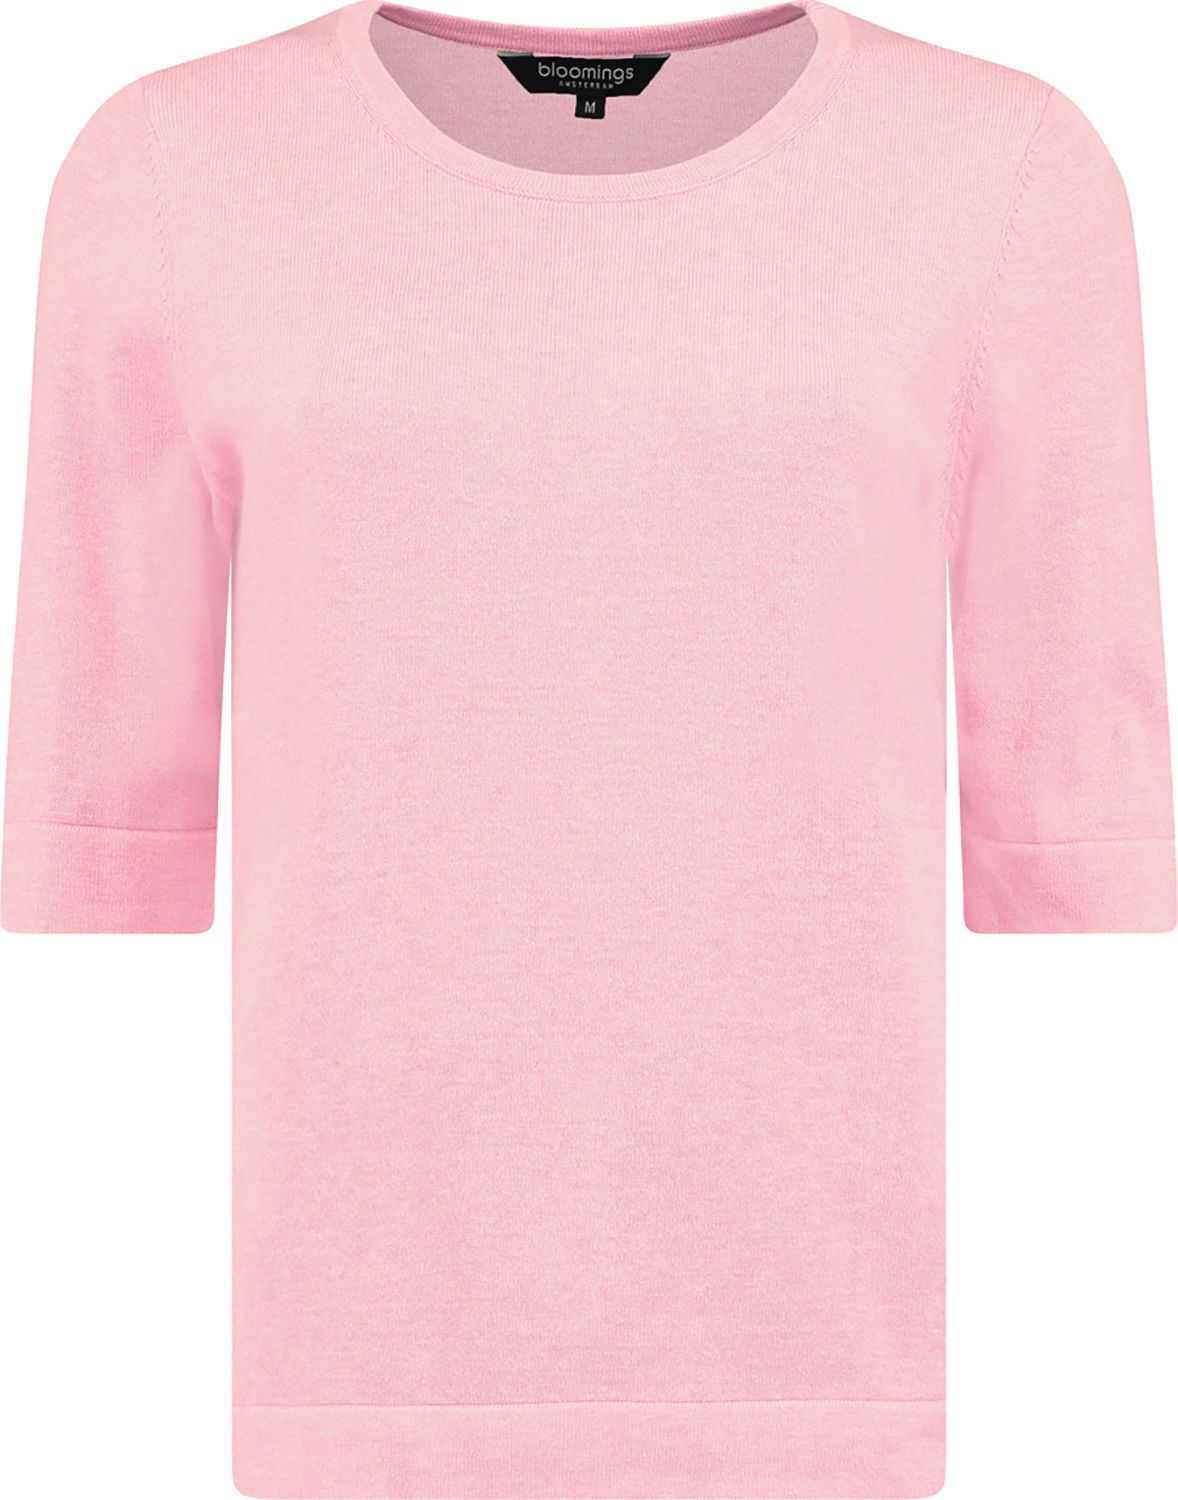 Bloomings Bloomins crew neck pullover s/s Roze